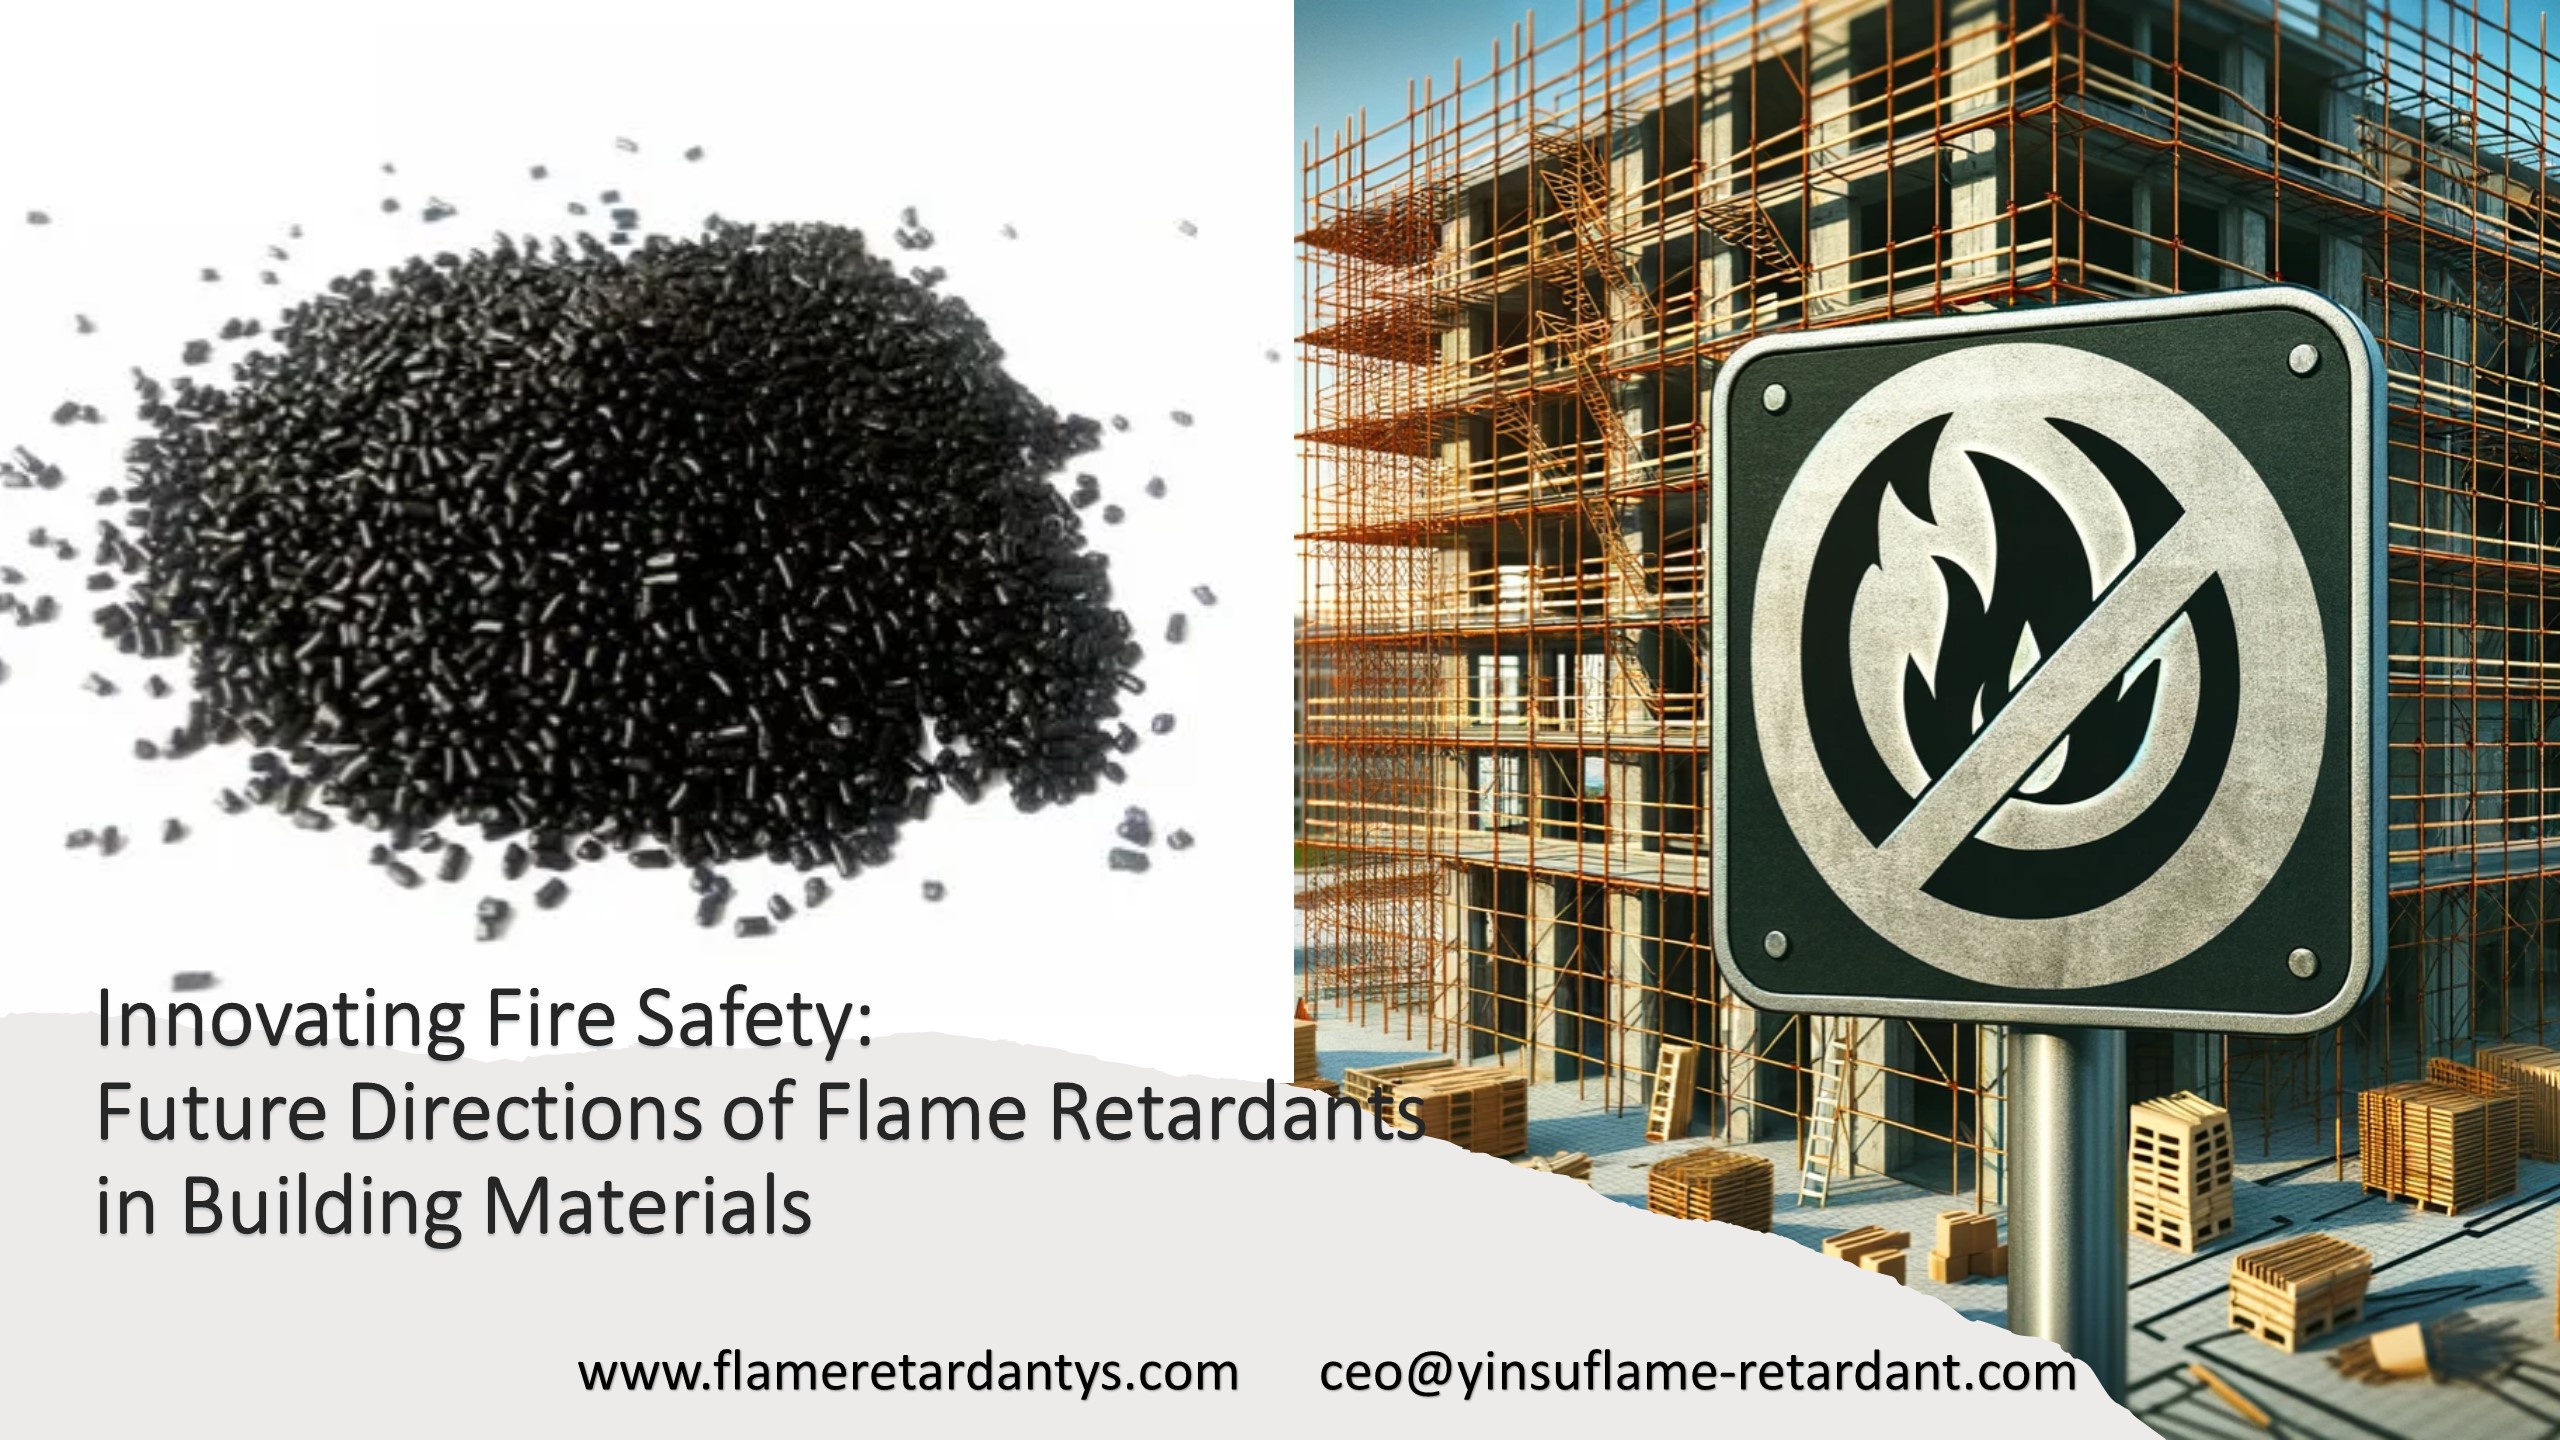 Innovating Fire Safety: Future Directions of Flame Retardants in Building Materials